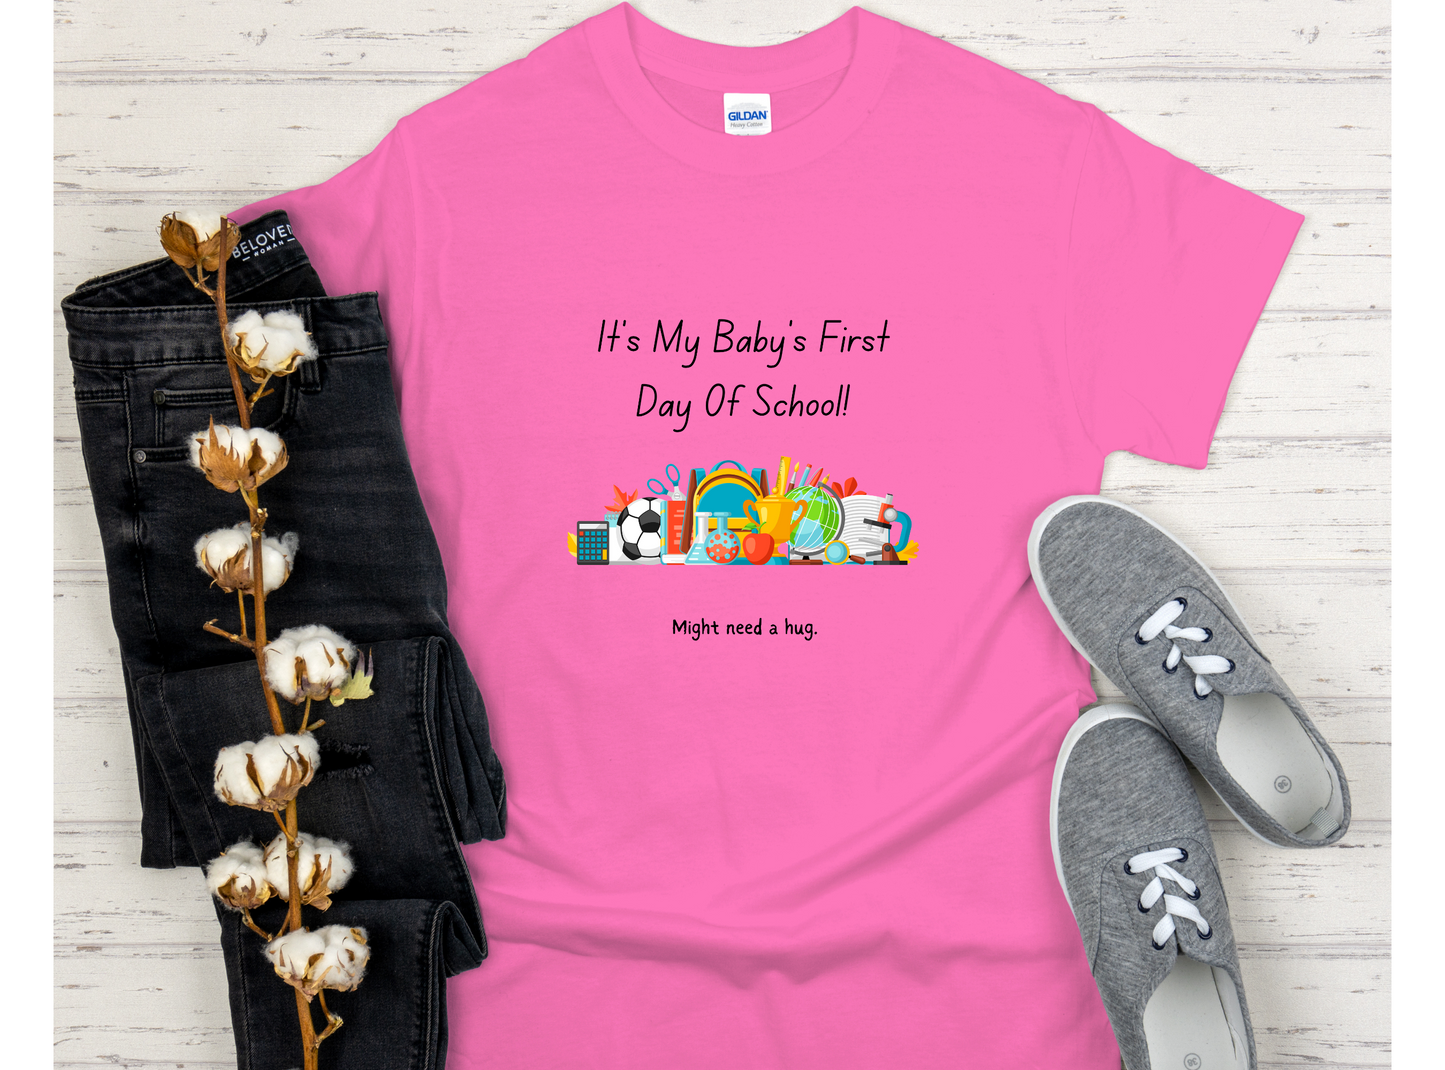 Baby's First Day of School Heavy Cotton Tee - The Good Life Vibe